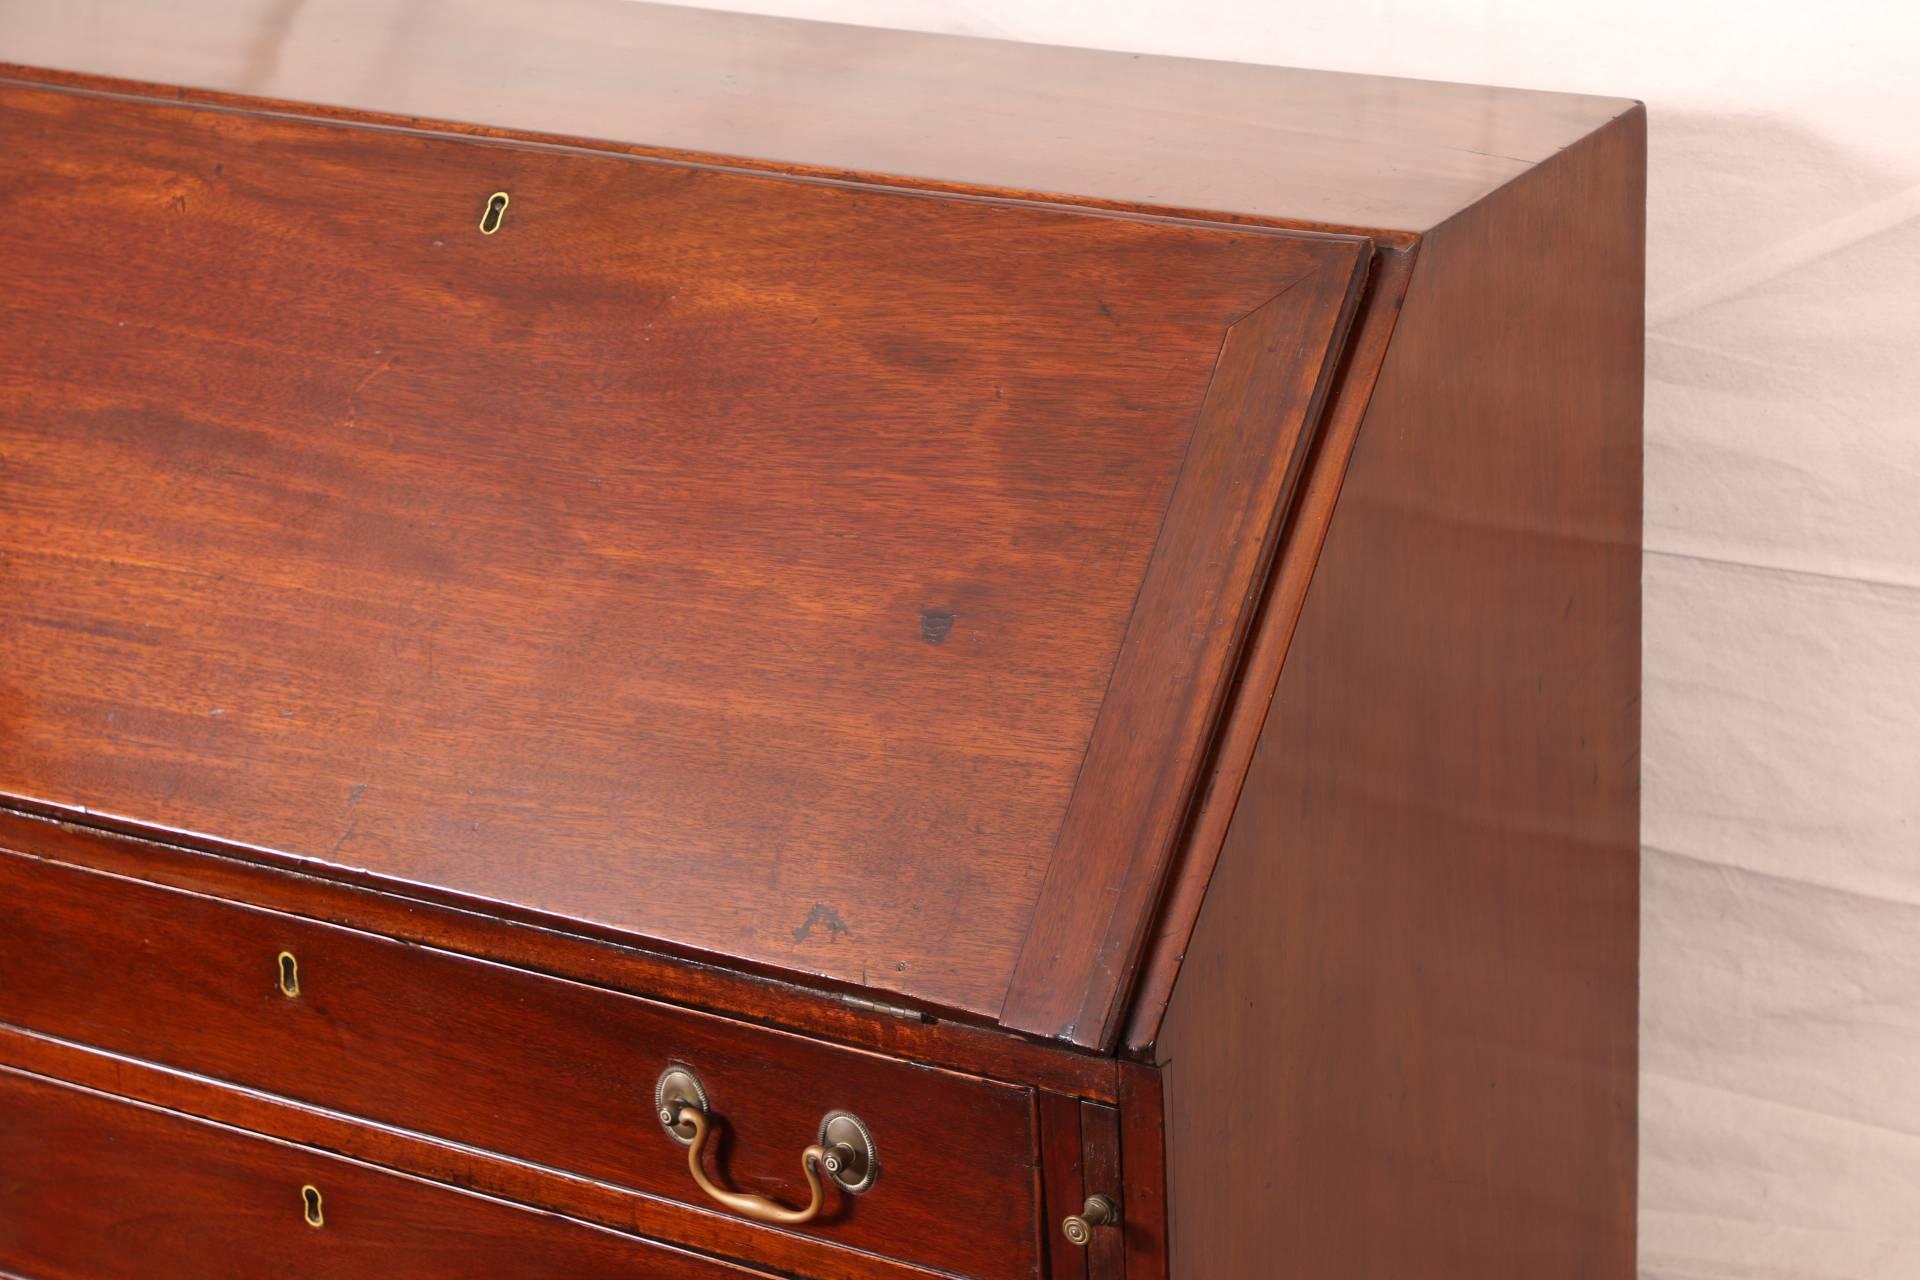 Antique George III English slant front desk, mahogany, four graduated drawers with brass keyholes and handles, slant front with pull out supports an a brass keyhole, opening to cubby holes and drawers, whole raised on bracket feet, lacking keys.